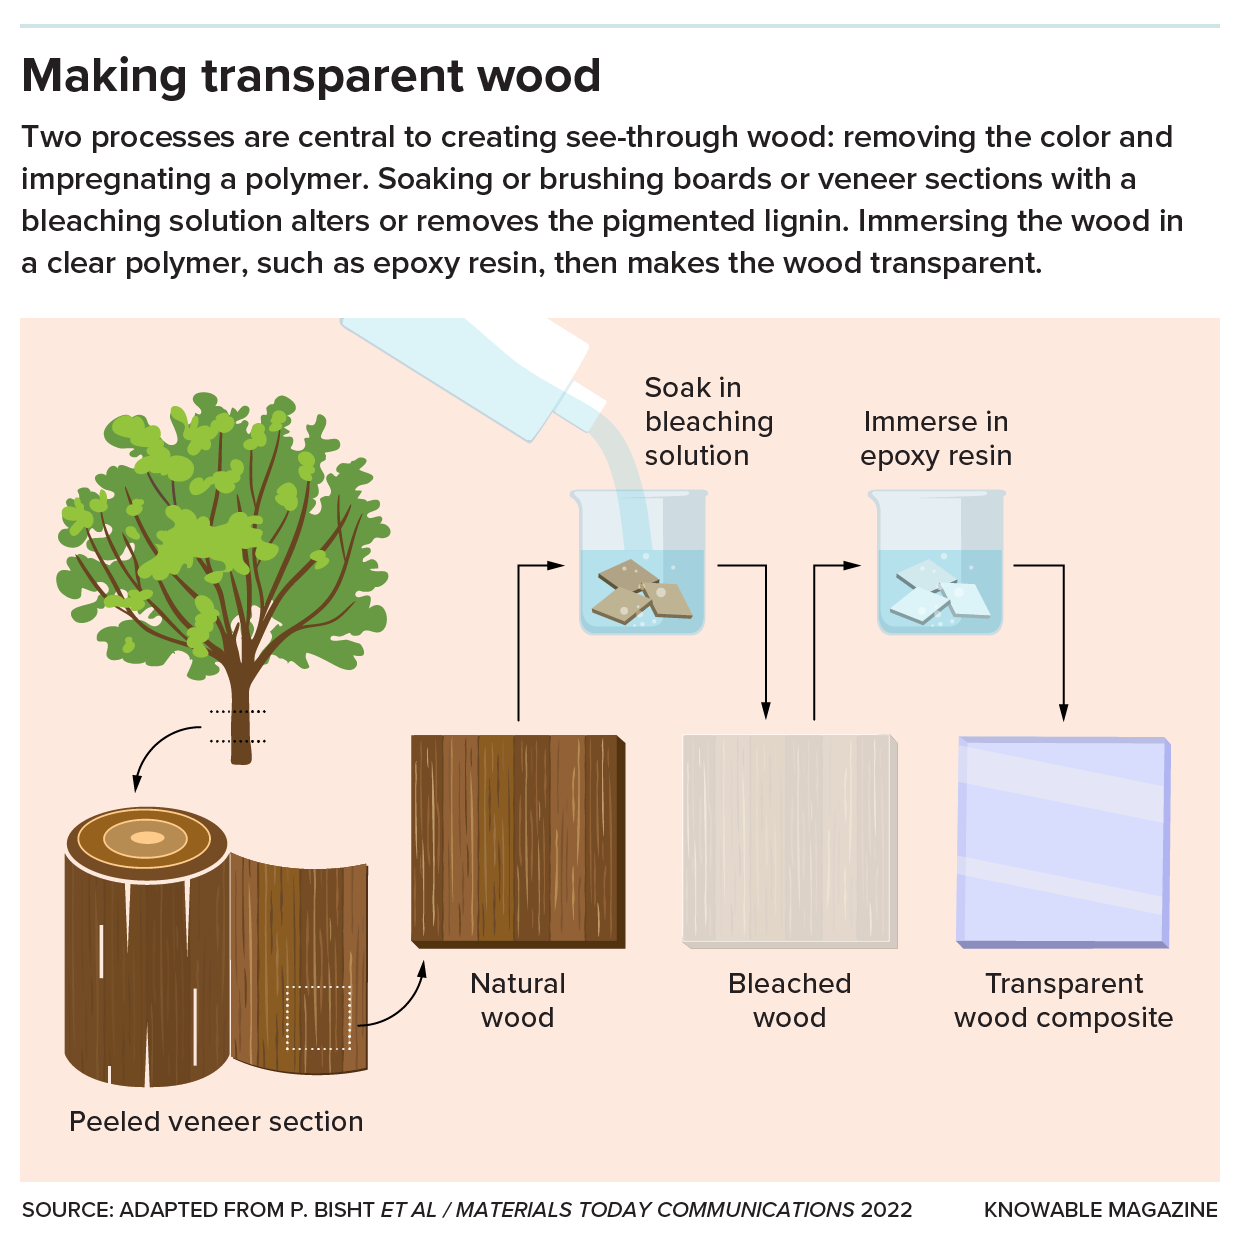 A variety of tree species have been explored for engineering transparent wood including balsa, rubberwood, birch, pine and poplar. CREDIT: KNOWABLE MAGAZINE